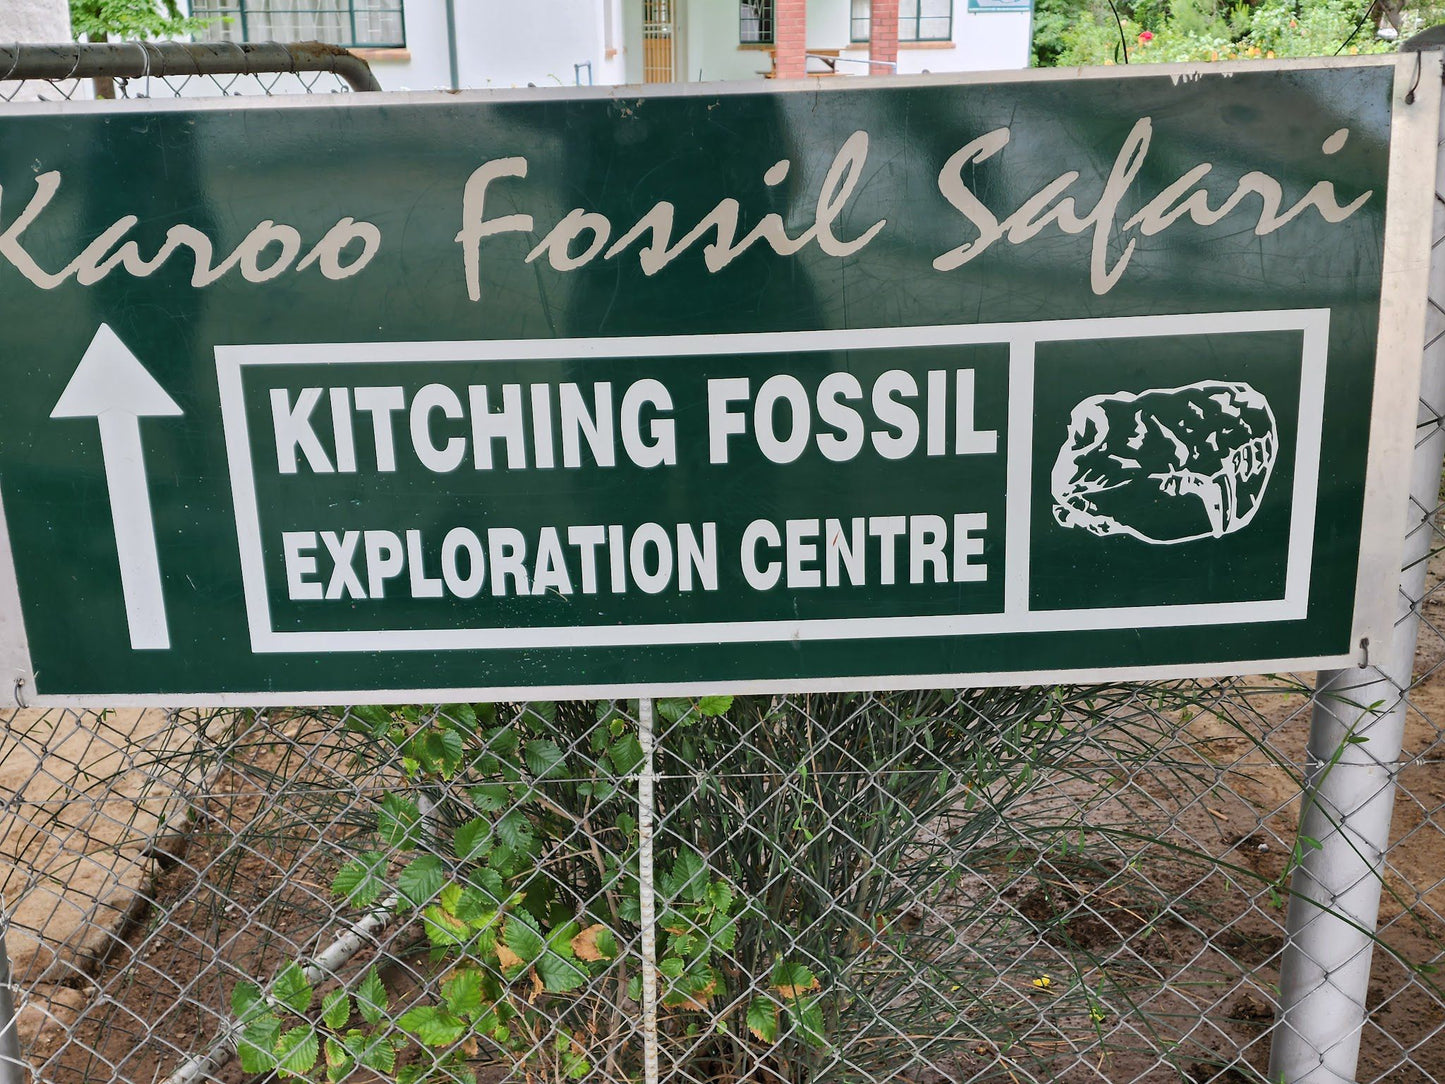  Kitching Fossil Exploration Centre